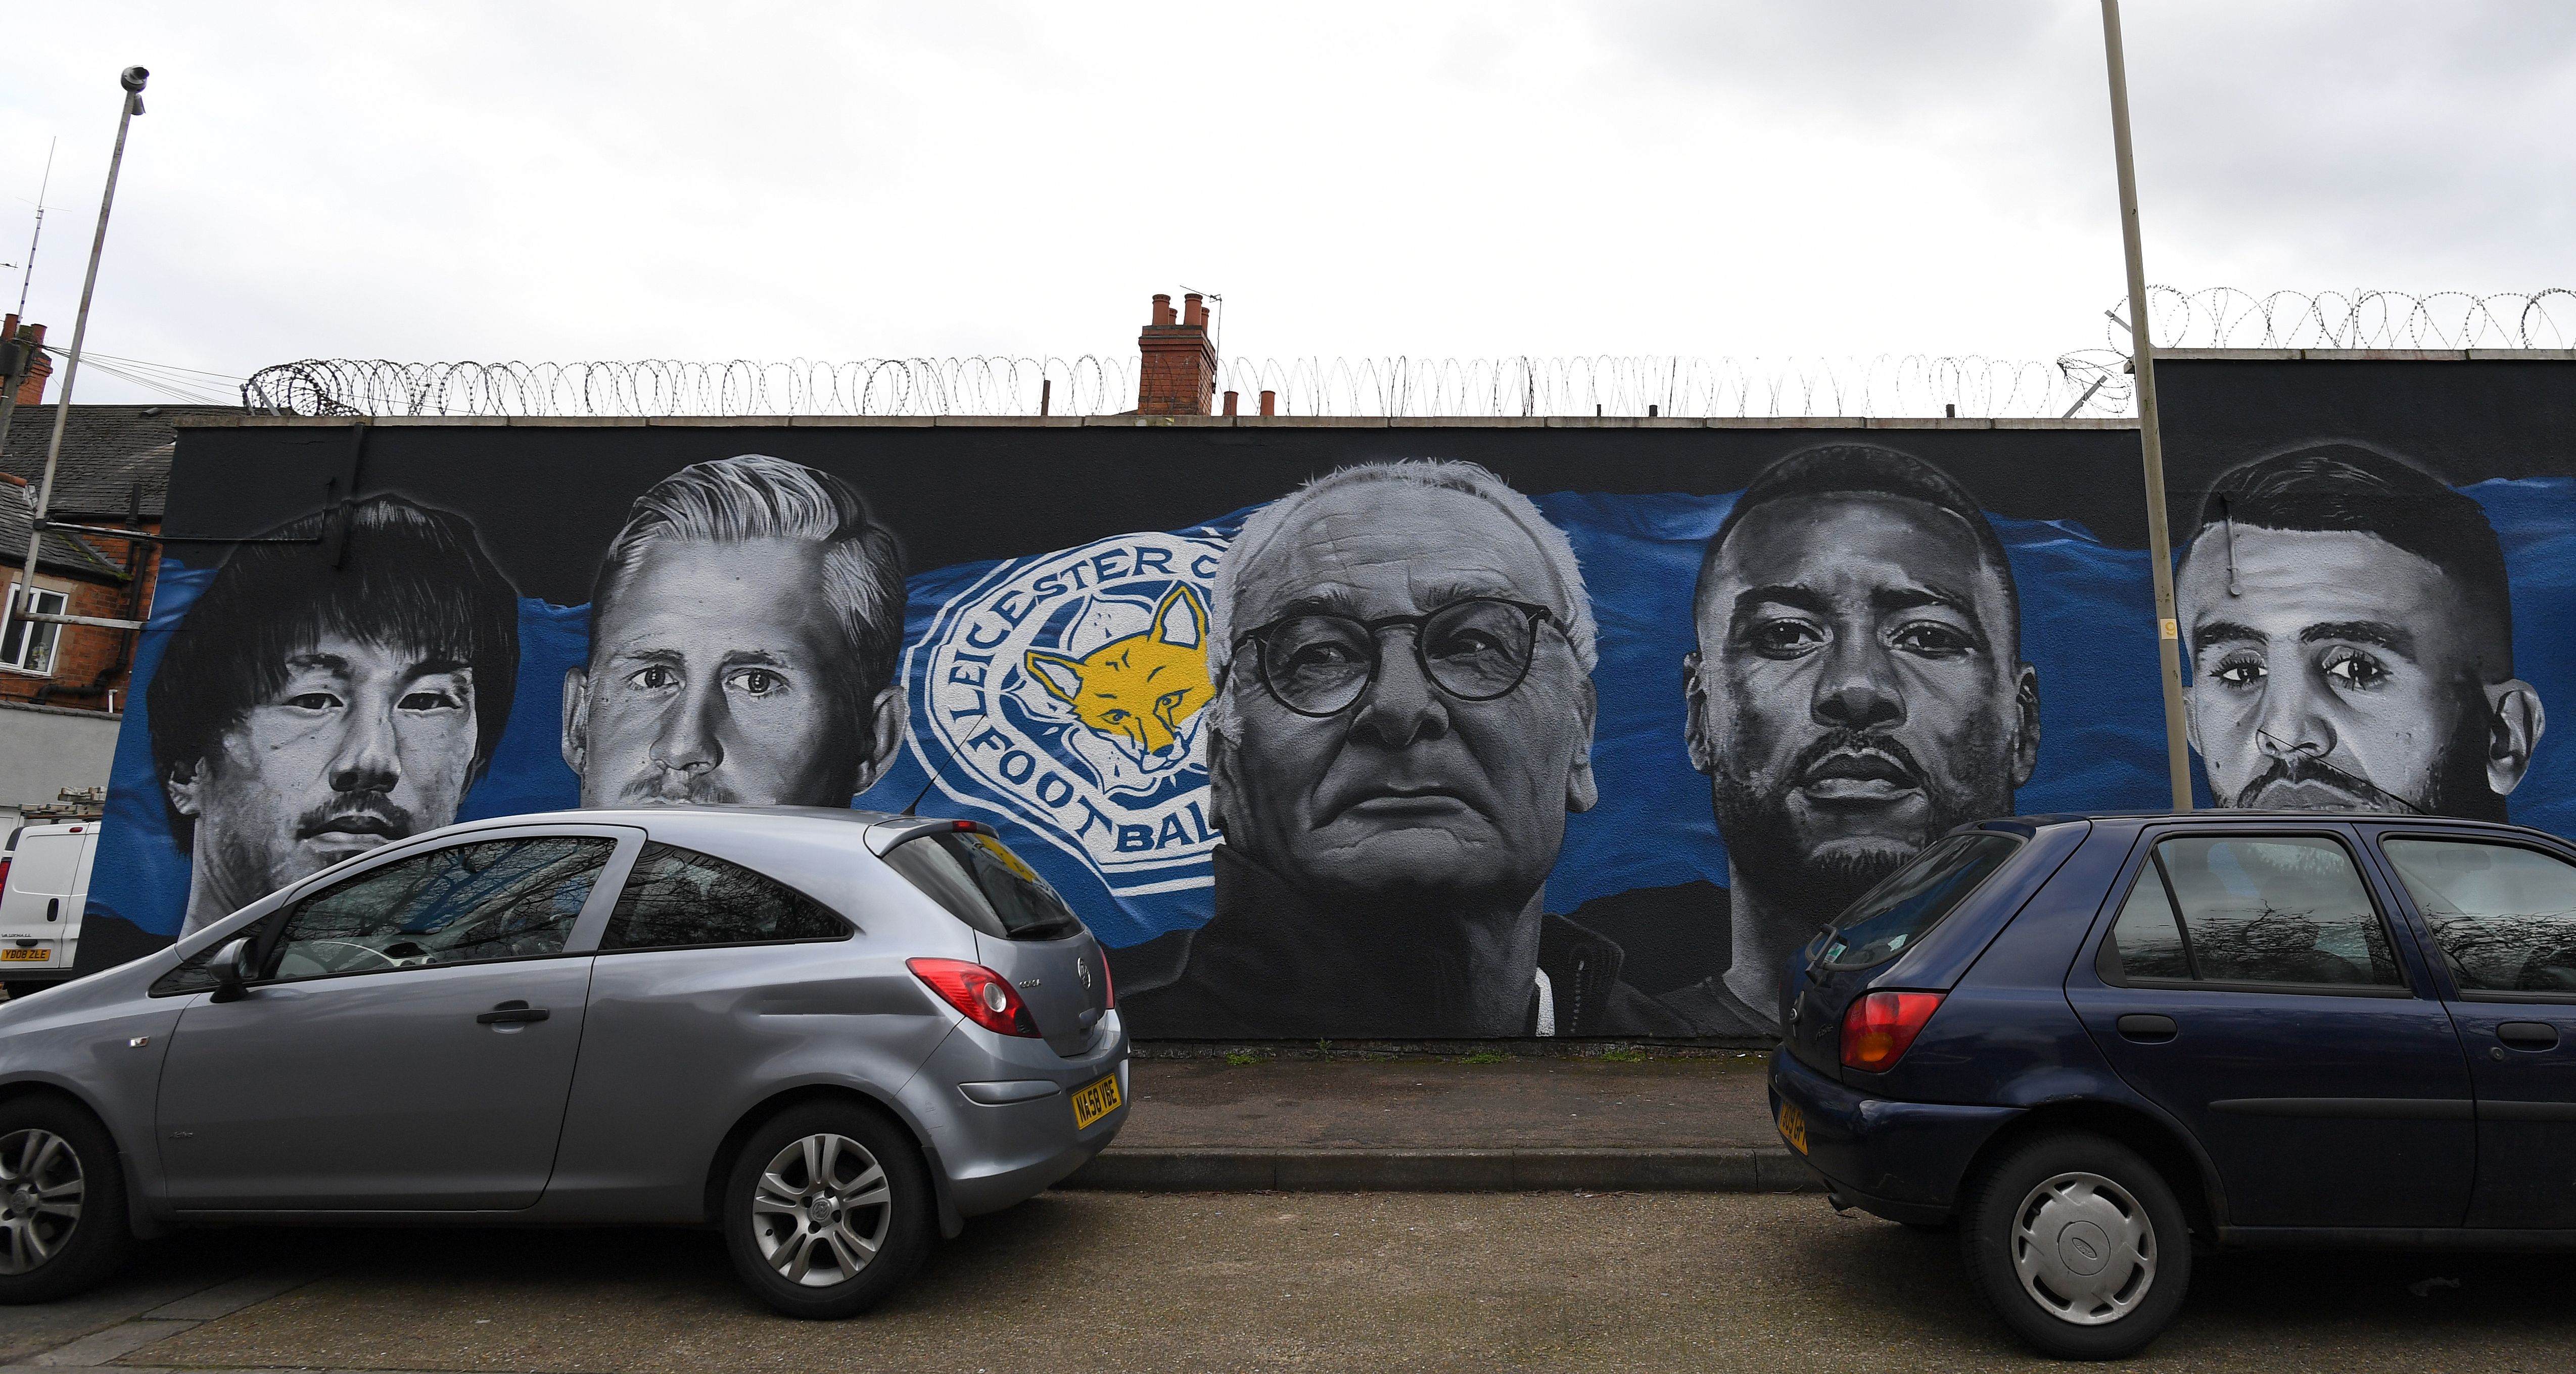 A giant mural created by artist Richard Wilson, depicts Leicester City's Japanese striker Shinji Okazaki (L), Leicester City's Danish goalkeeper Kasper Schmeichel (2L), Leicester City's former Italian manager Claudio Ranieri, (C), Leicester City's English-born Jamaican defender Wes Morgan (2R) and Leicester City's Algerian midfielder Riyad Mahrez in Leicester, central England on May 7, 2016.in Leicester, central England on March 13, 2017.
Leicester City are set to play Sevilla in a UEFA Champions League Round of 16 second leg football match on March 14.  / AFP PHOTO / Paul ELLIS / RESTRICTED TO EDITORIAL USE - MANDATORY MENTION OF THE ARTIST UPON PUBLICATION - TO ILLUSTRATE THE EVENT AS SPECIFIED IN THE CAPTION        (Photo credit should read PAUL ELLIS/AFP/Getty Images)